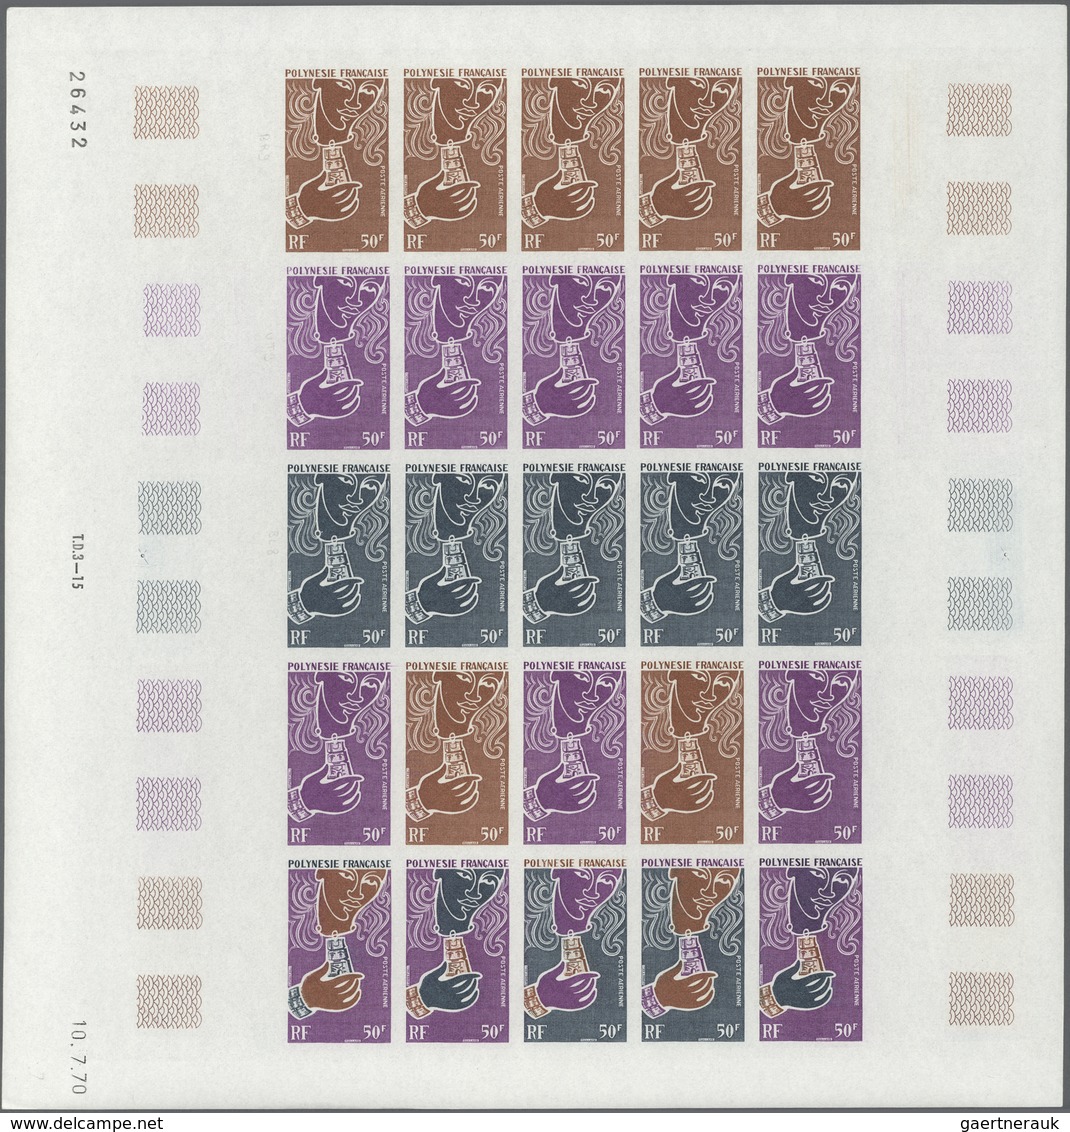 Französisch-Polynesien: 1970, Oyster and Pearl Fishery, 2fr. to 50fr., complete set of five values e